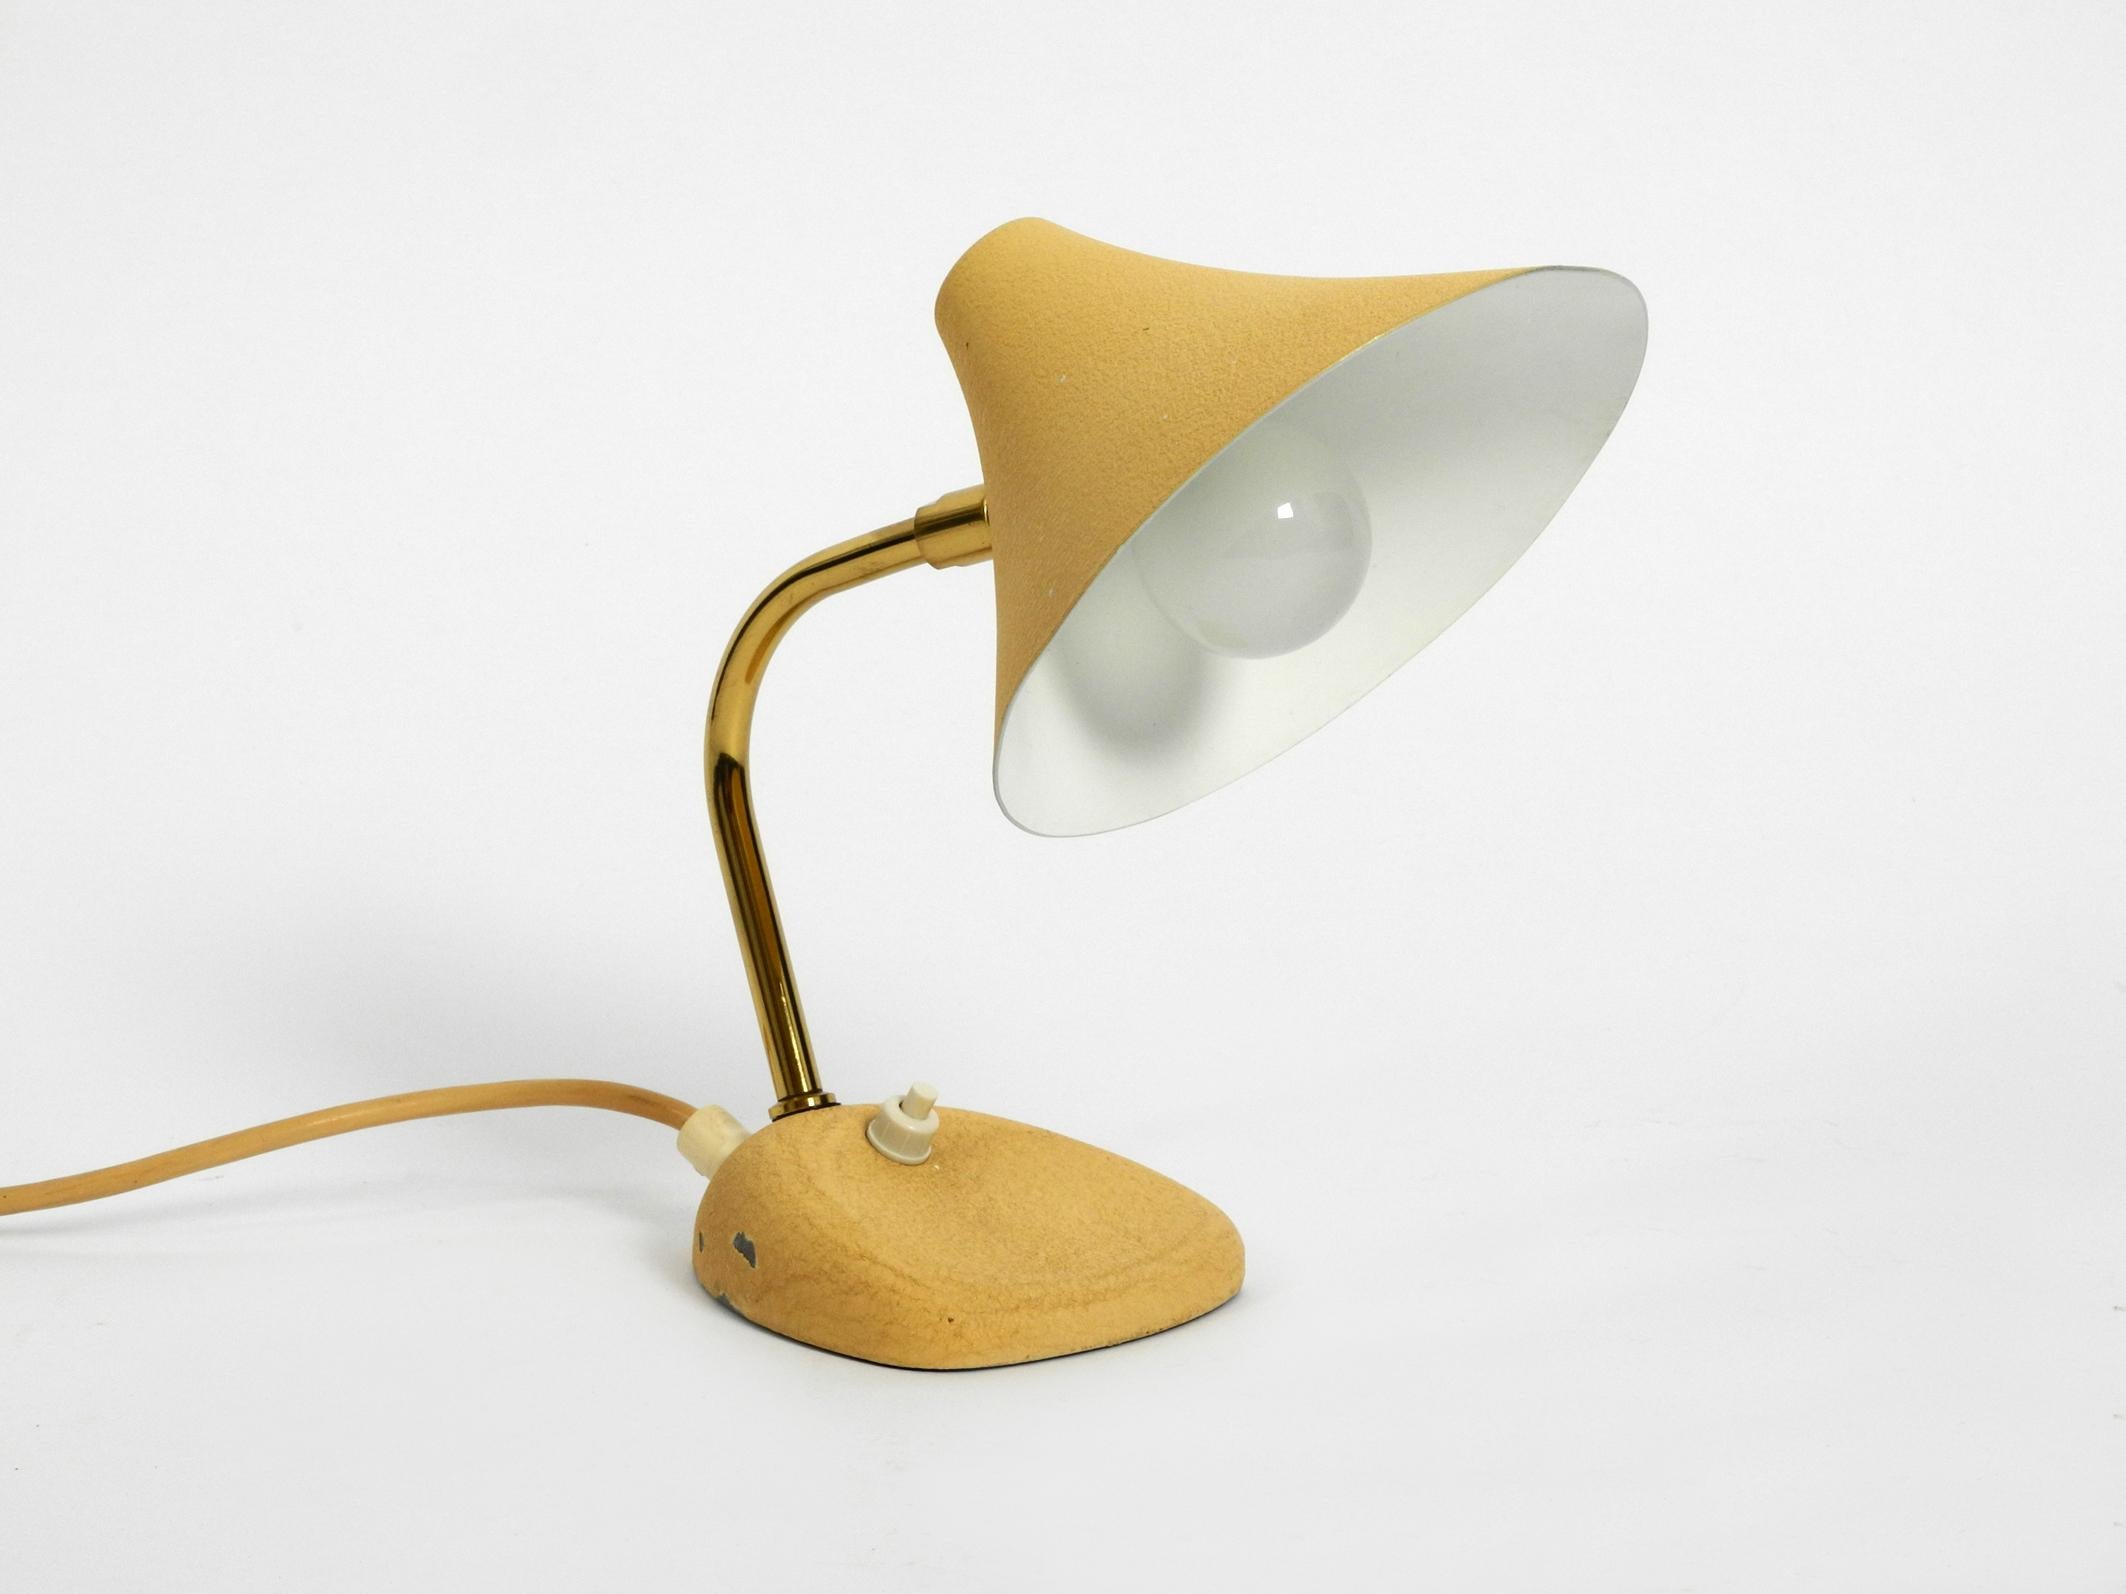 Very nice little Mid-Century Modern table lamp. Made in Austria.
Great 1950s design with beige shrink paint and steplessly adjustable shade. 
Good vintage condition without damage.
On one side two paint abrasions on the foot.
Heavy foot for